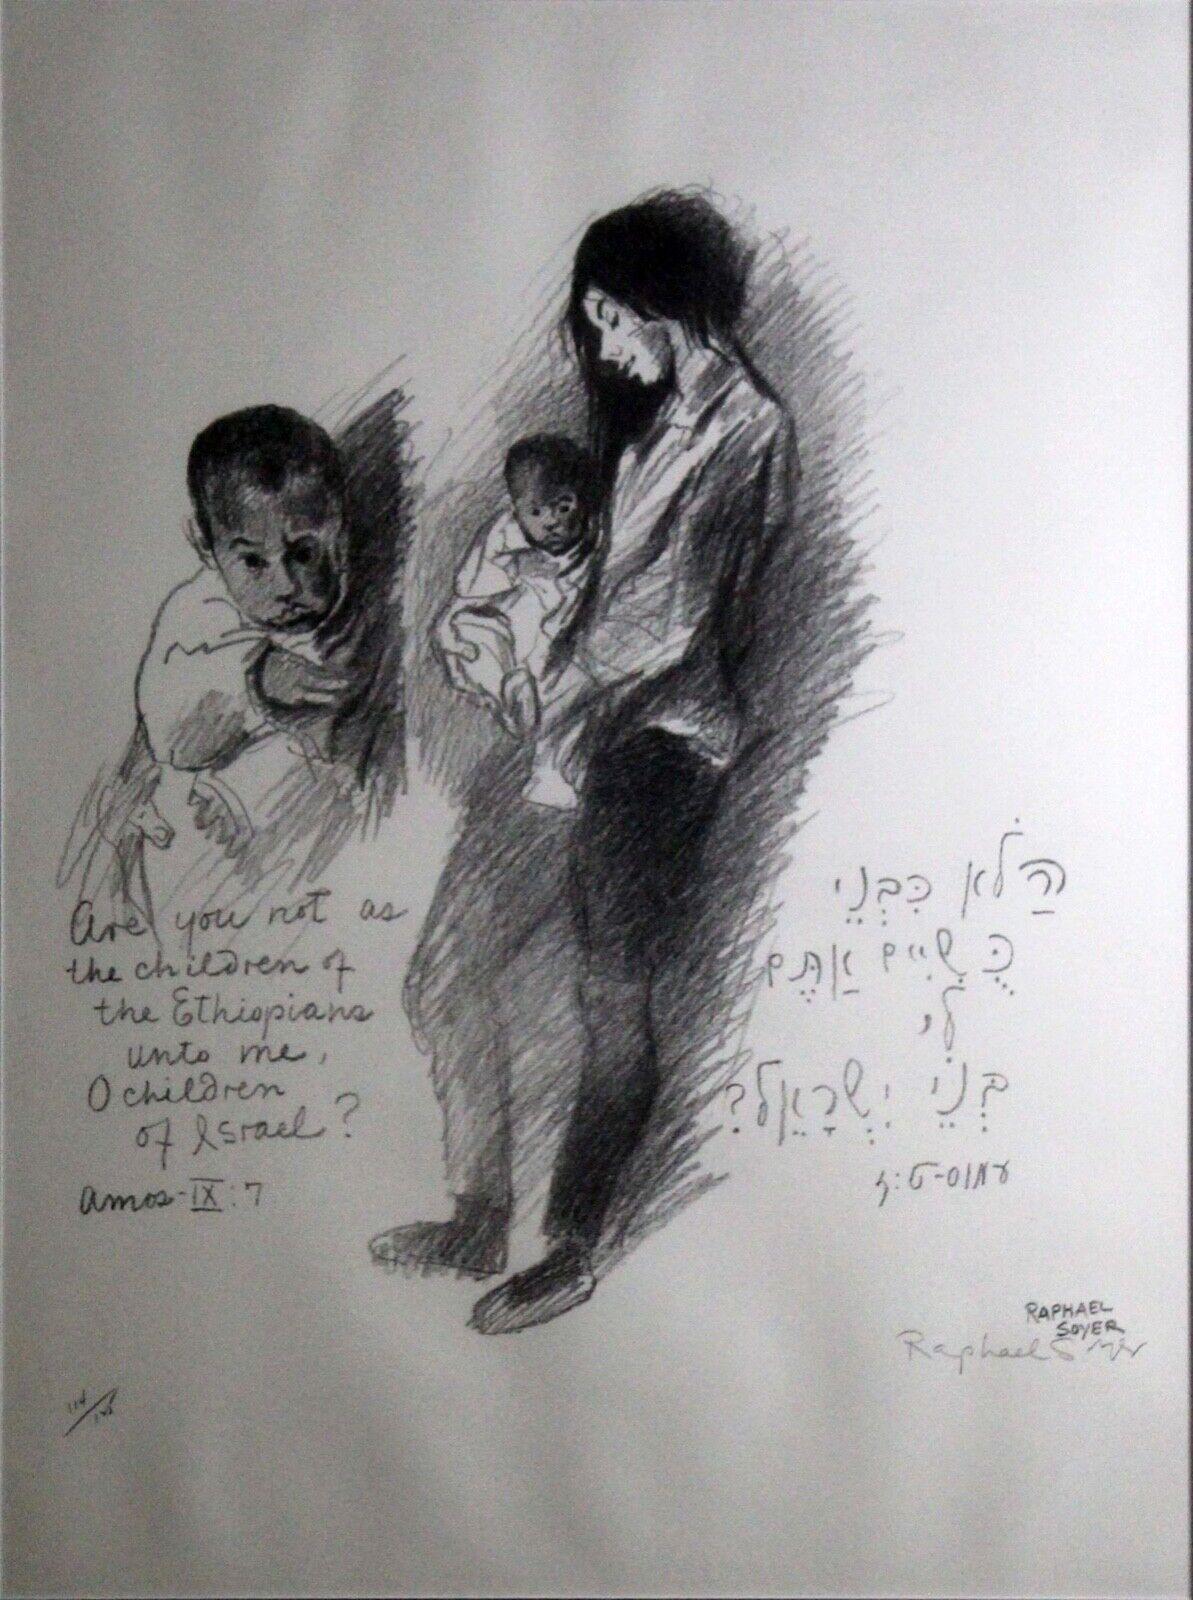 A contemplative lithograph on paper titled Woman and Child by Raphael Soyer. From the portfolio 